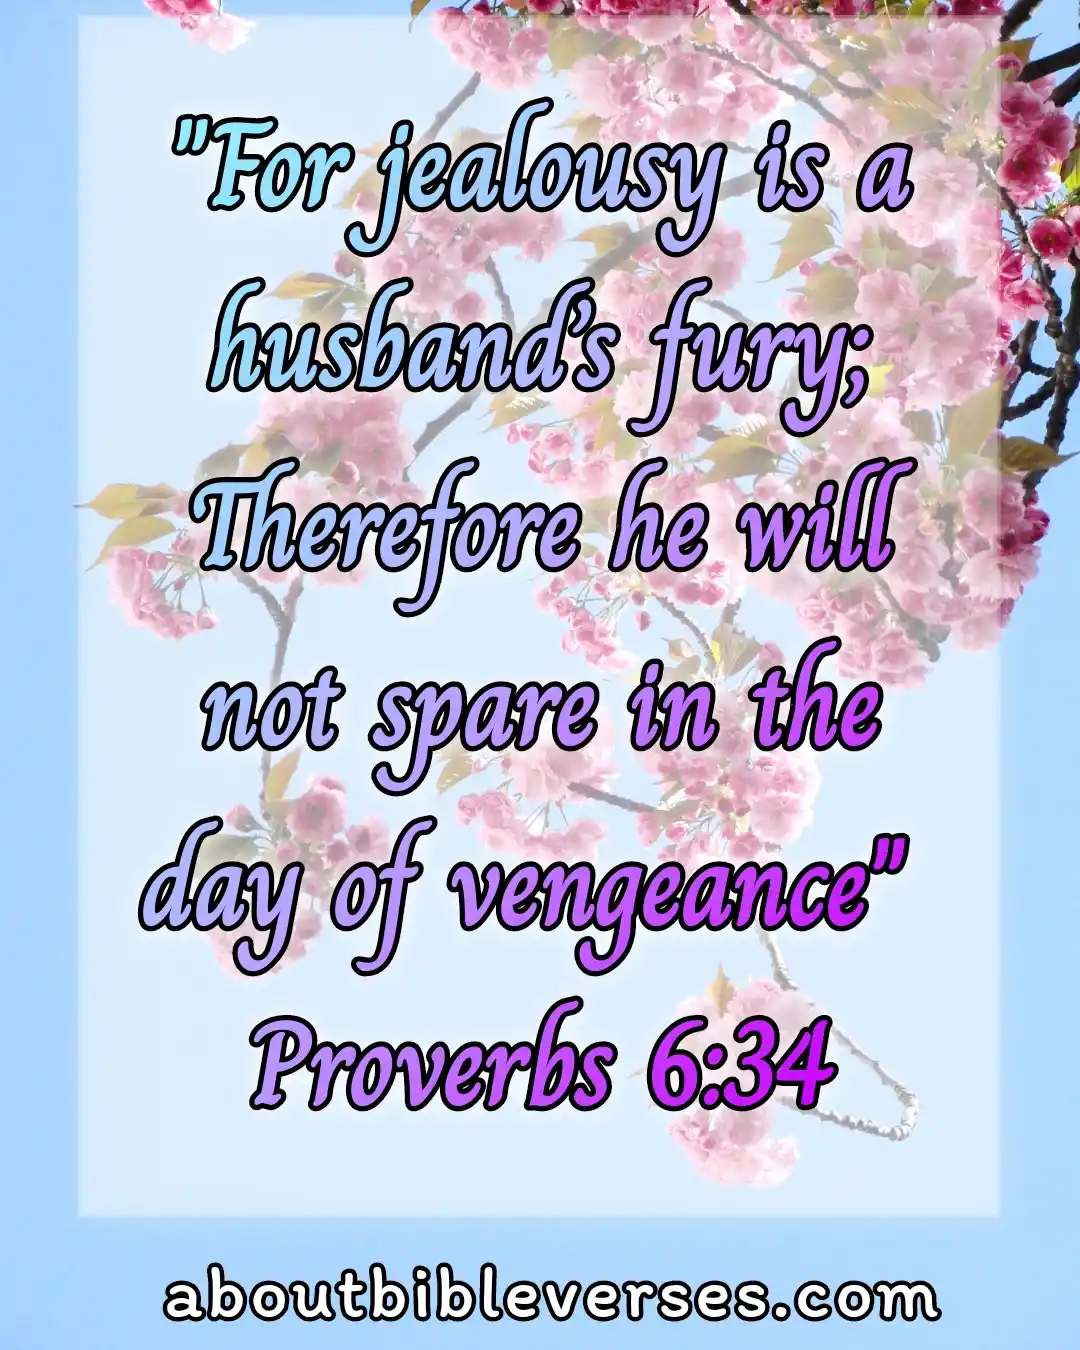 bible verses about jealousy and envy (Proverbs 6:34)